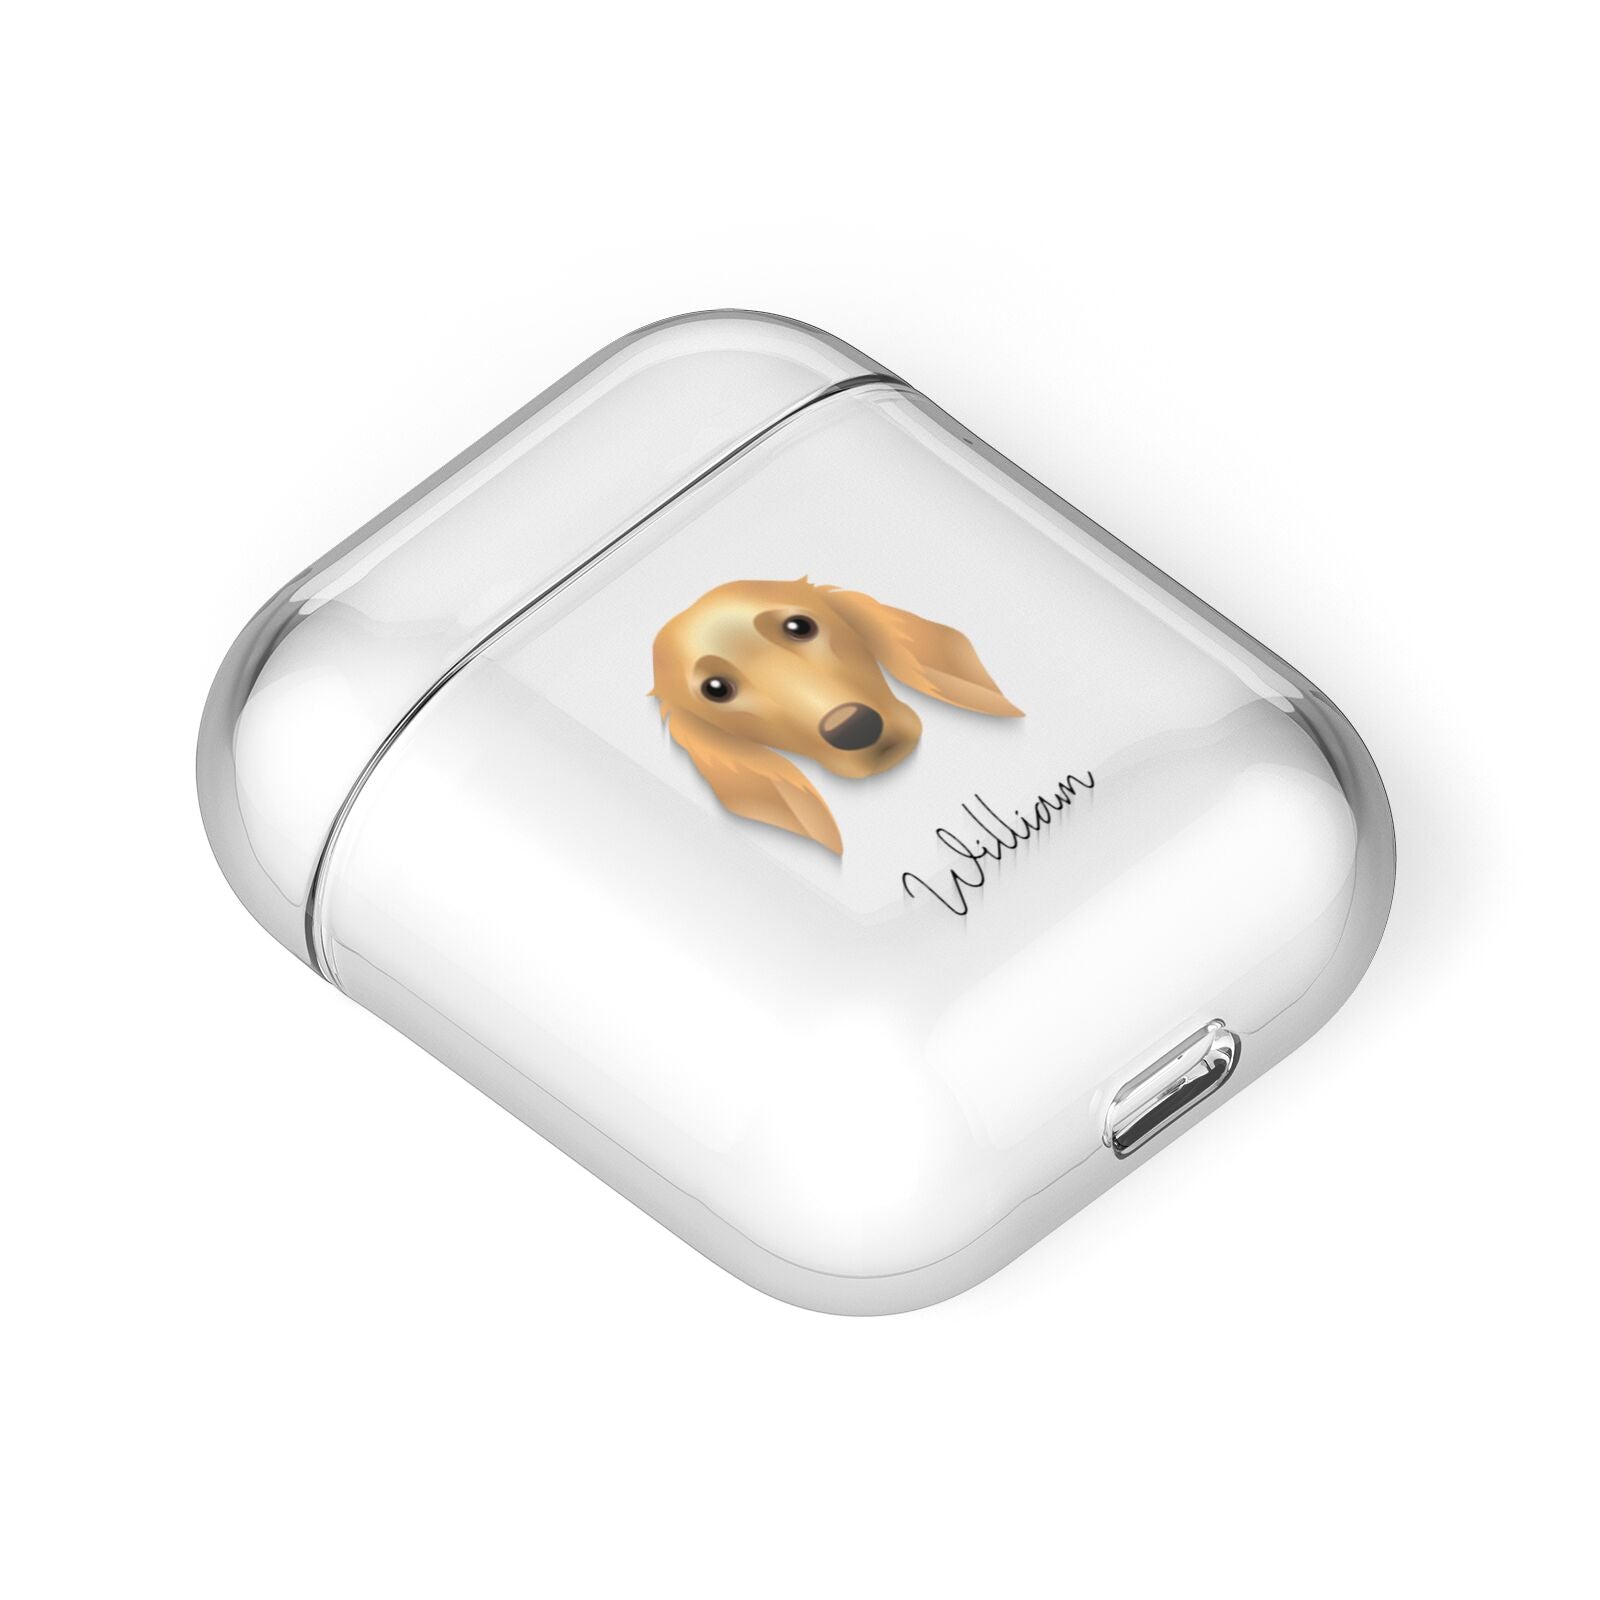 Golden Dox Personalised AirPods Case Laid Flat